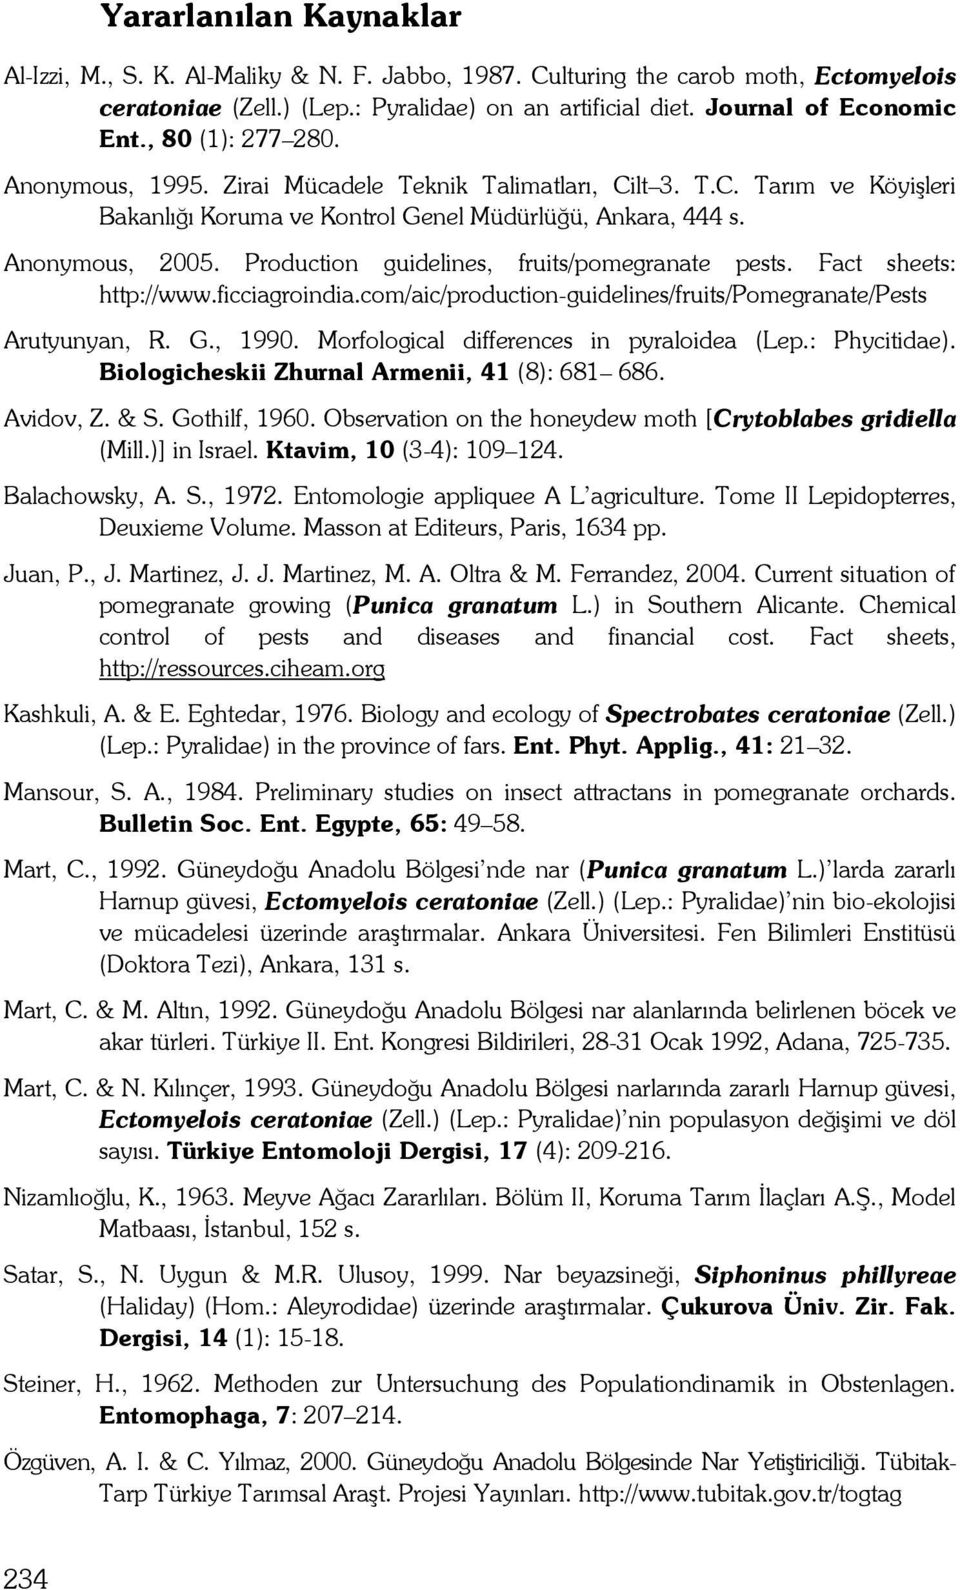 Production guidelines, fruits/pomegranate pests. Fact sheets: http://www.ficciagroindia.com/aic/production-guidelines/fruits/pomegranate/pests Arutyunyan, R. G., 1990.